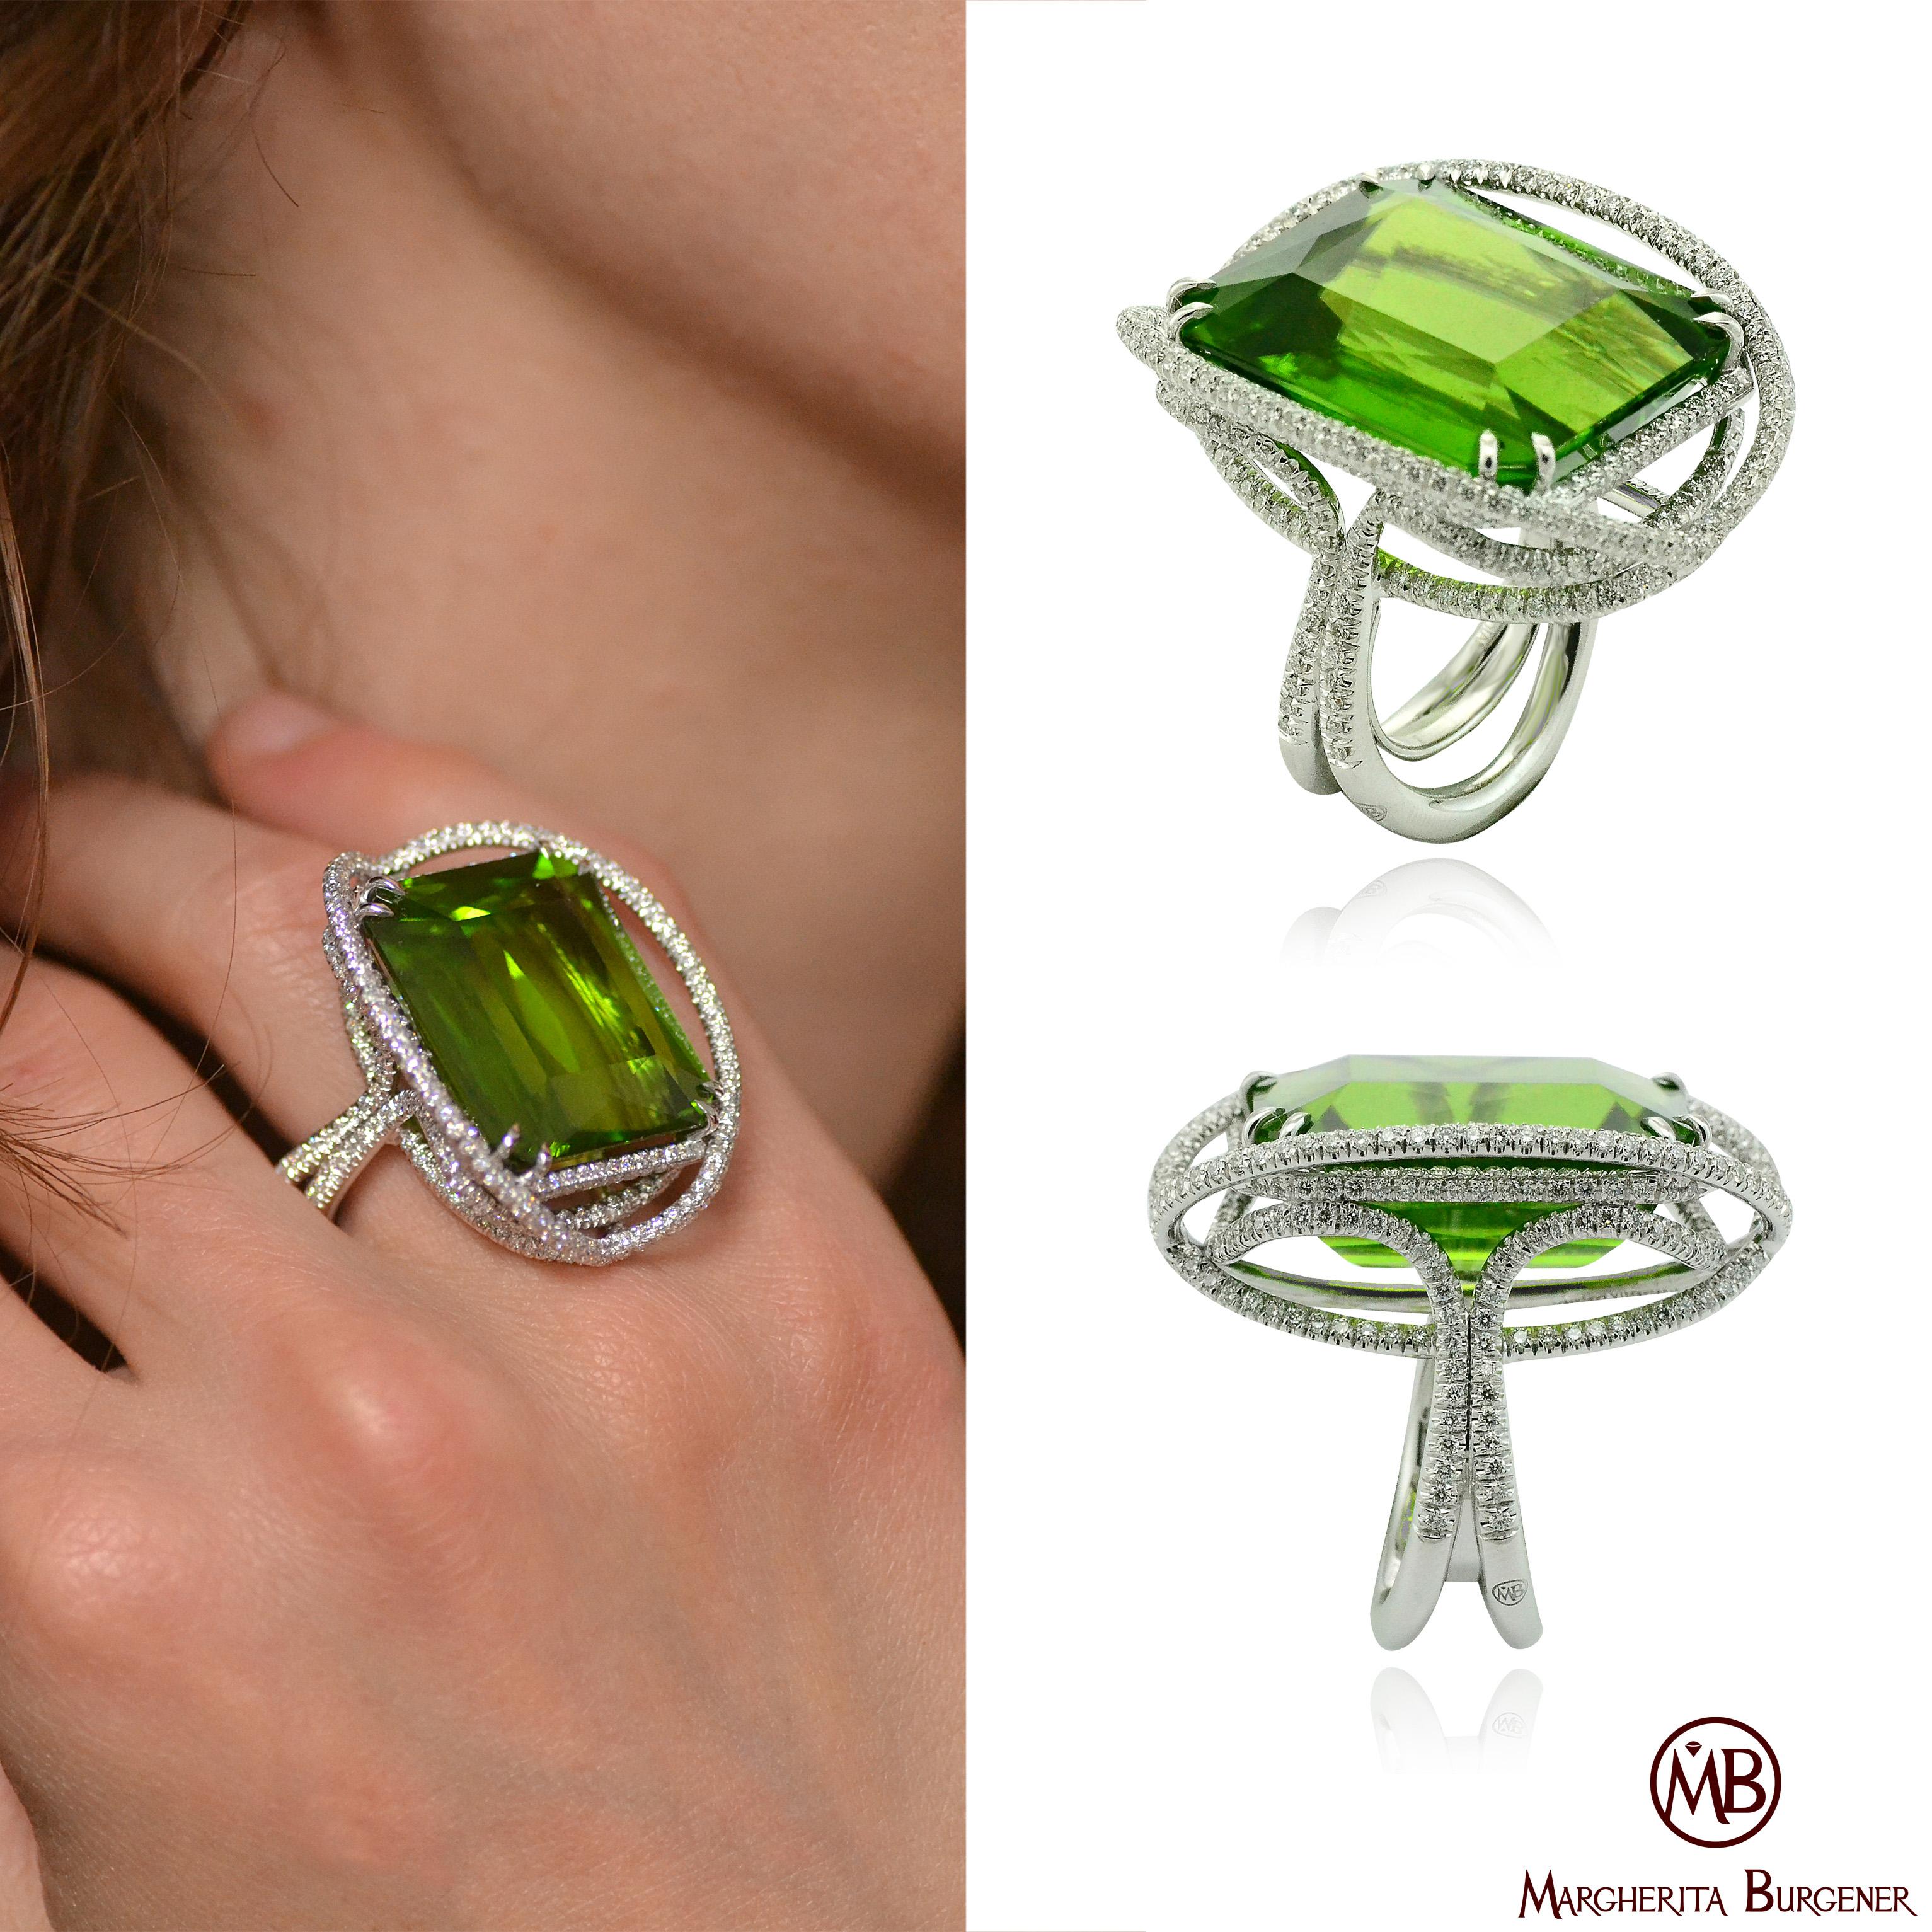 An impressive Peridot of Burma origin, weighing 53.50 carat is centering the Satellite ring, a hand carved gold wire, is designing an enchanting designed it is fully pavé set with diamonds.
The amazing green color of the peridot is highlighted by